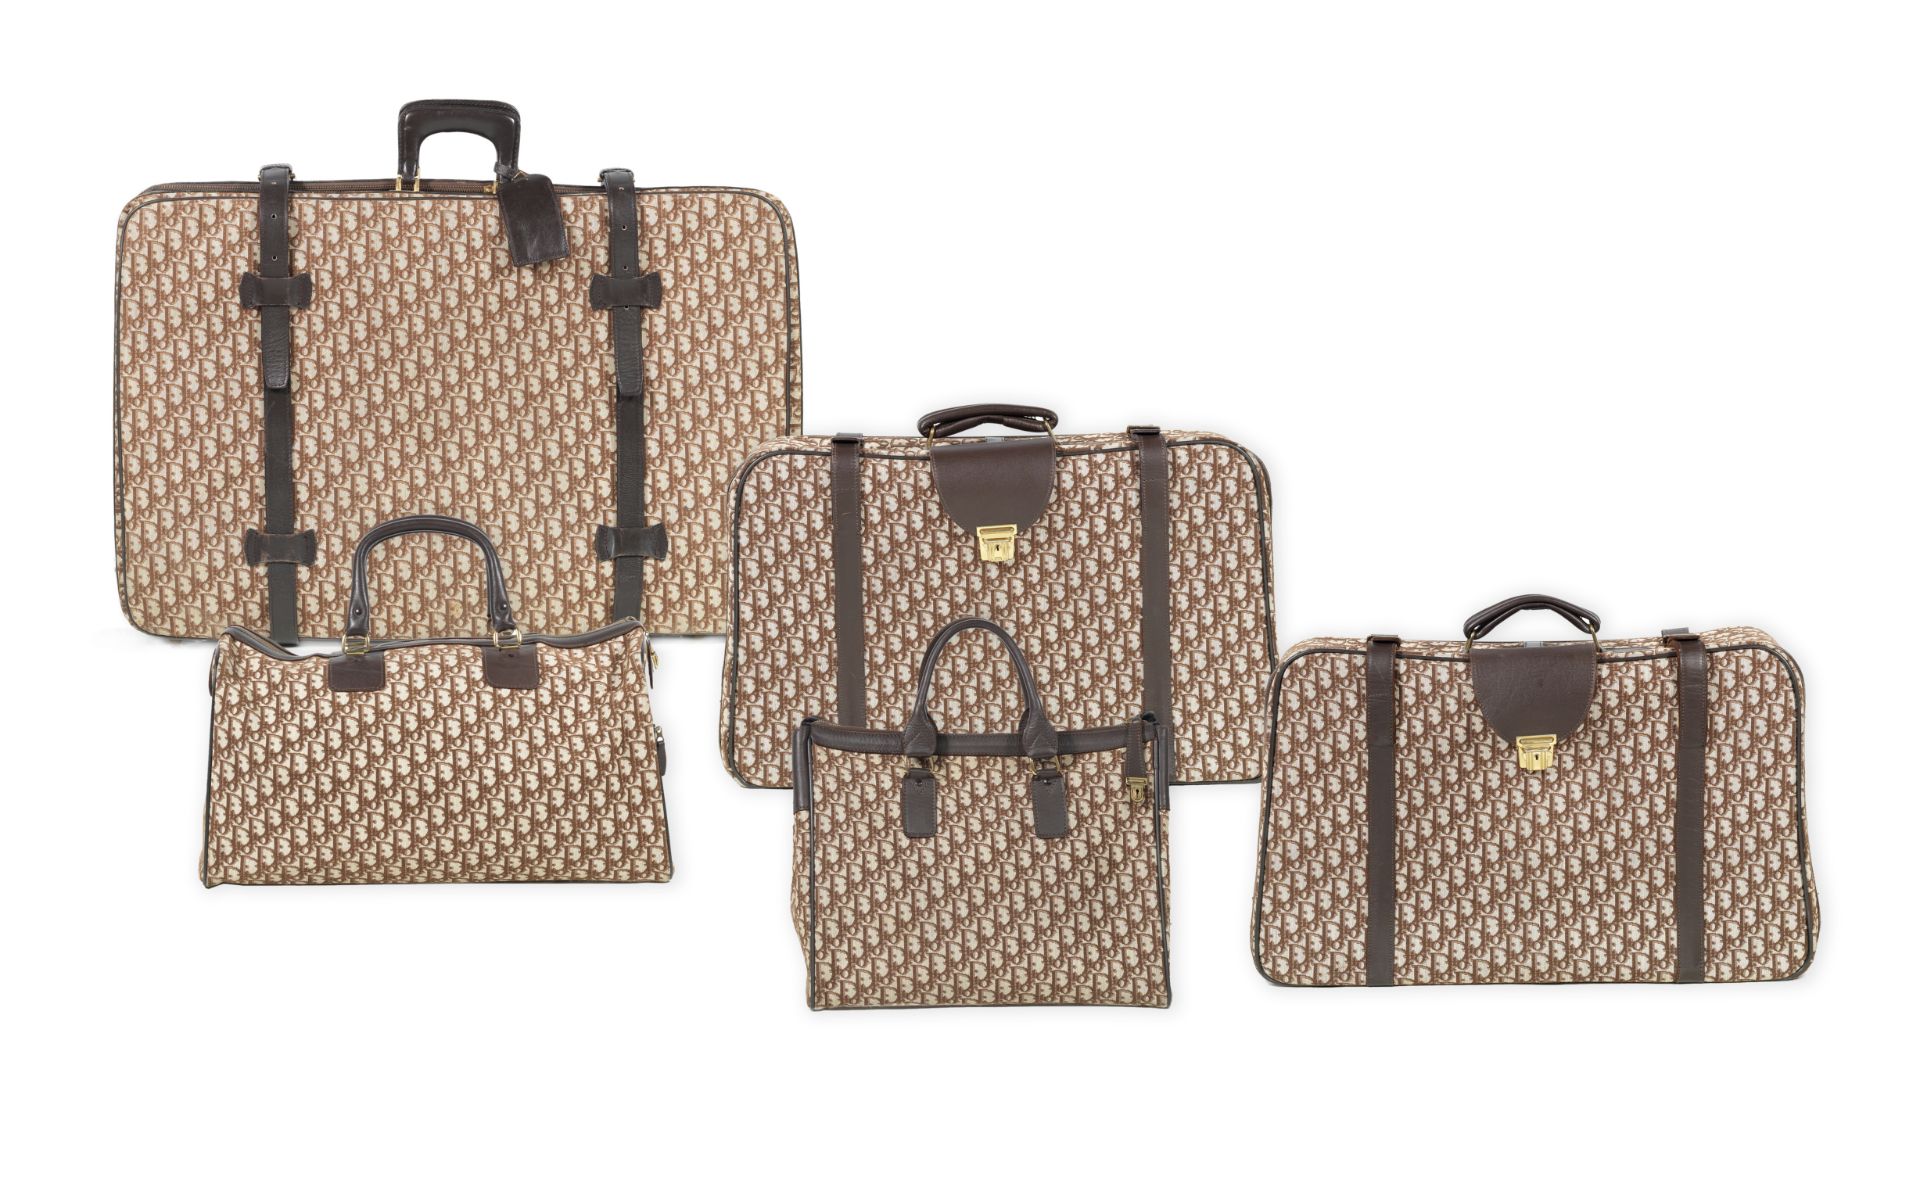 Brown Oblique Luggage Set, Christian Dior, late 1970s, (Includes luggage tag)